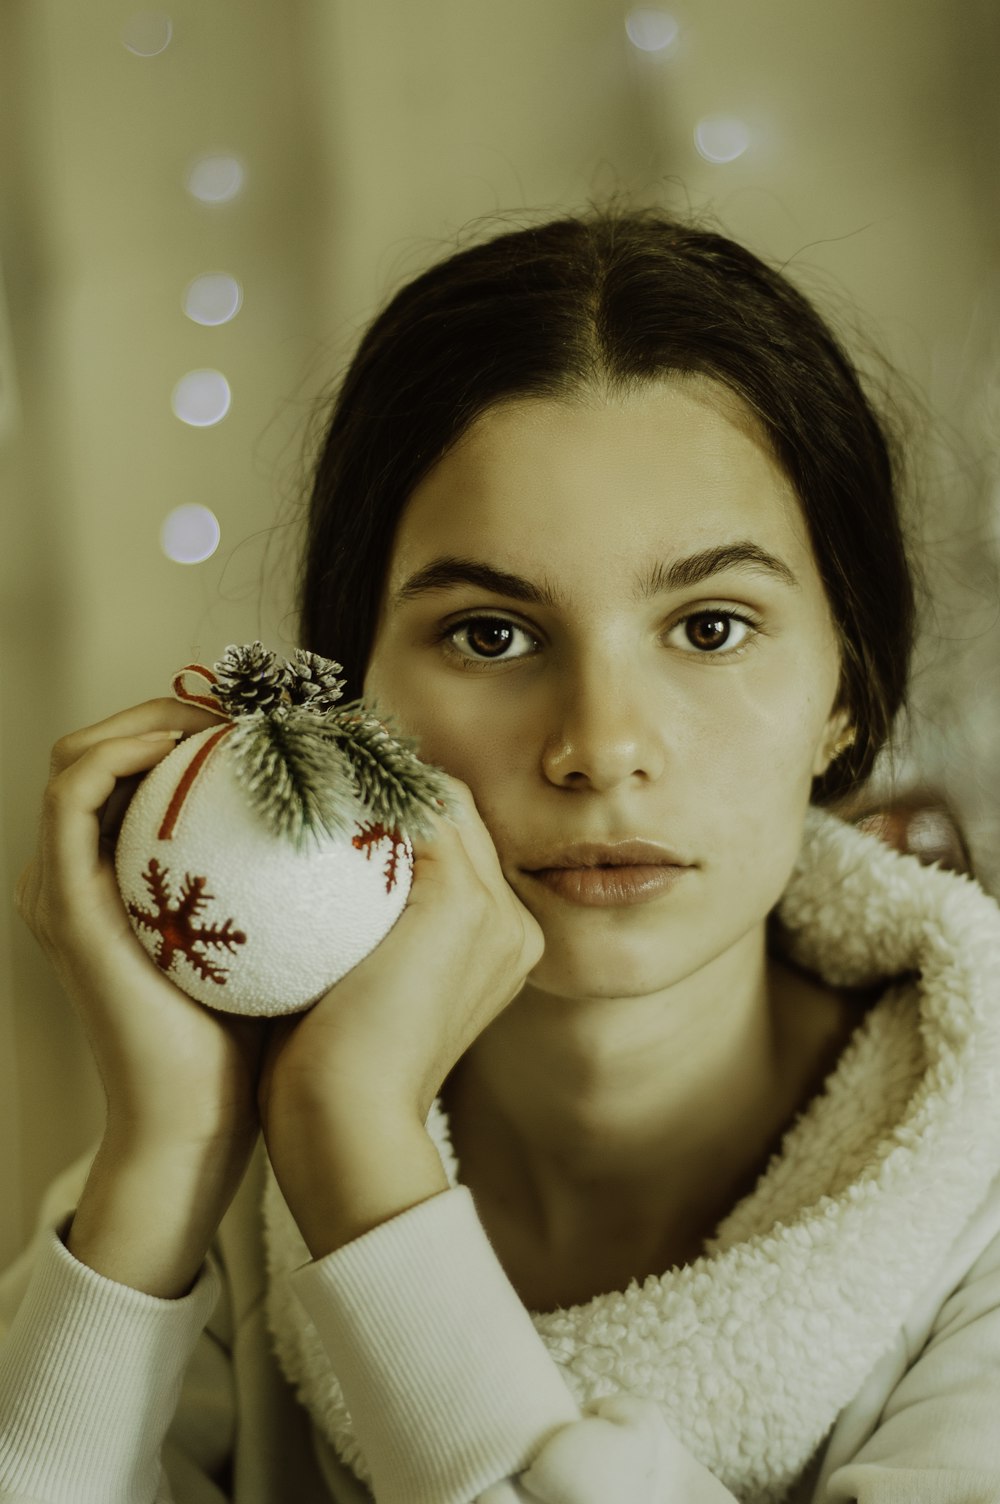 woman holding a bauble ornament